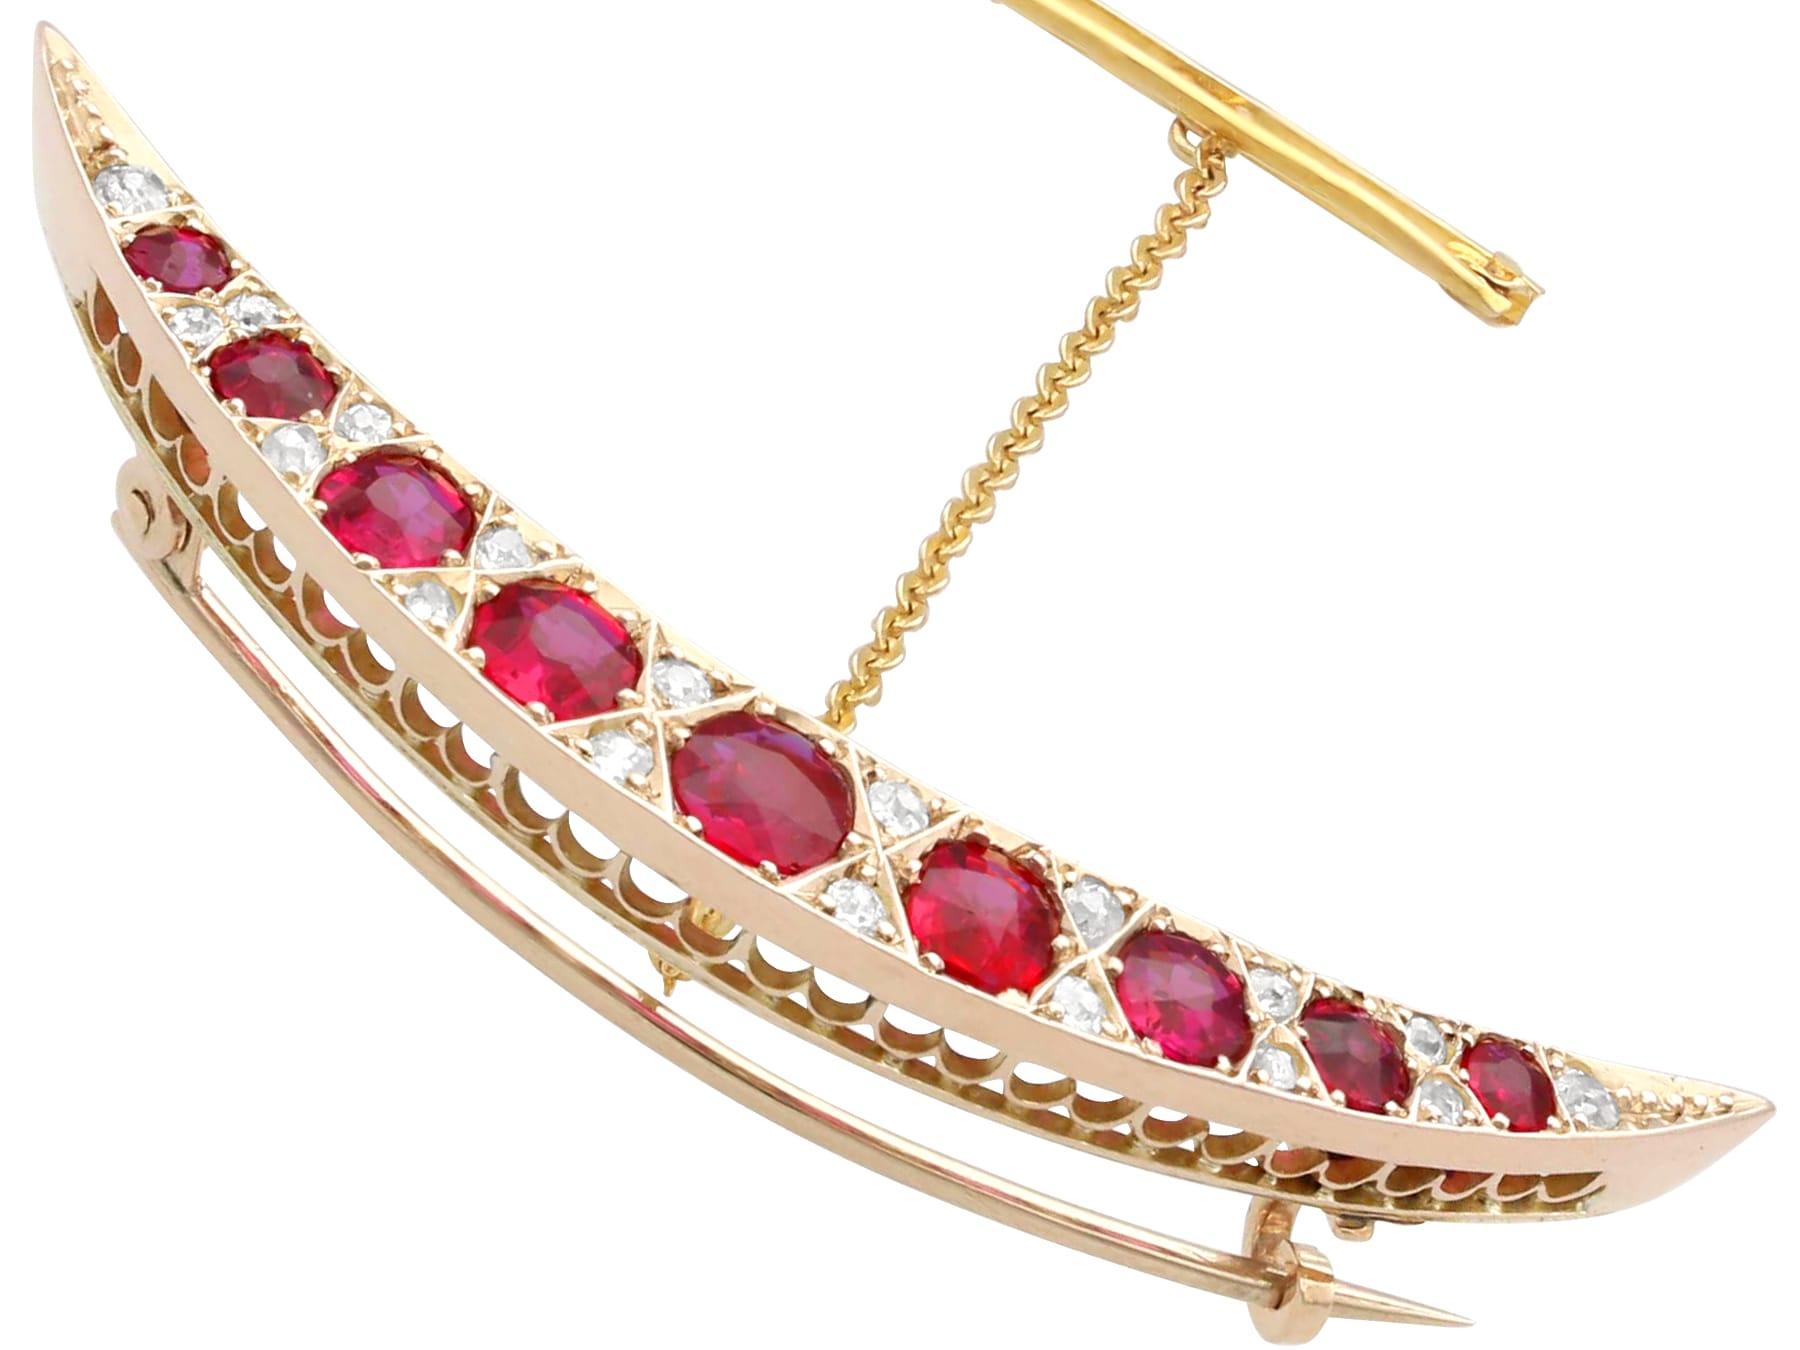 Antique 3.95 Carat Ruby, Diamond Crescent Brooch in 8k Yellow Gold In Excellent Condition For Sale In Jesmond, Newcastle Upon Tyne